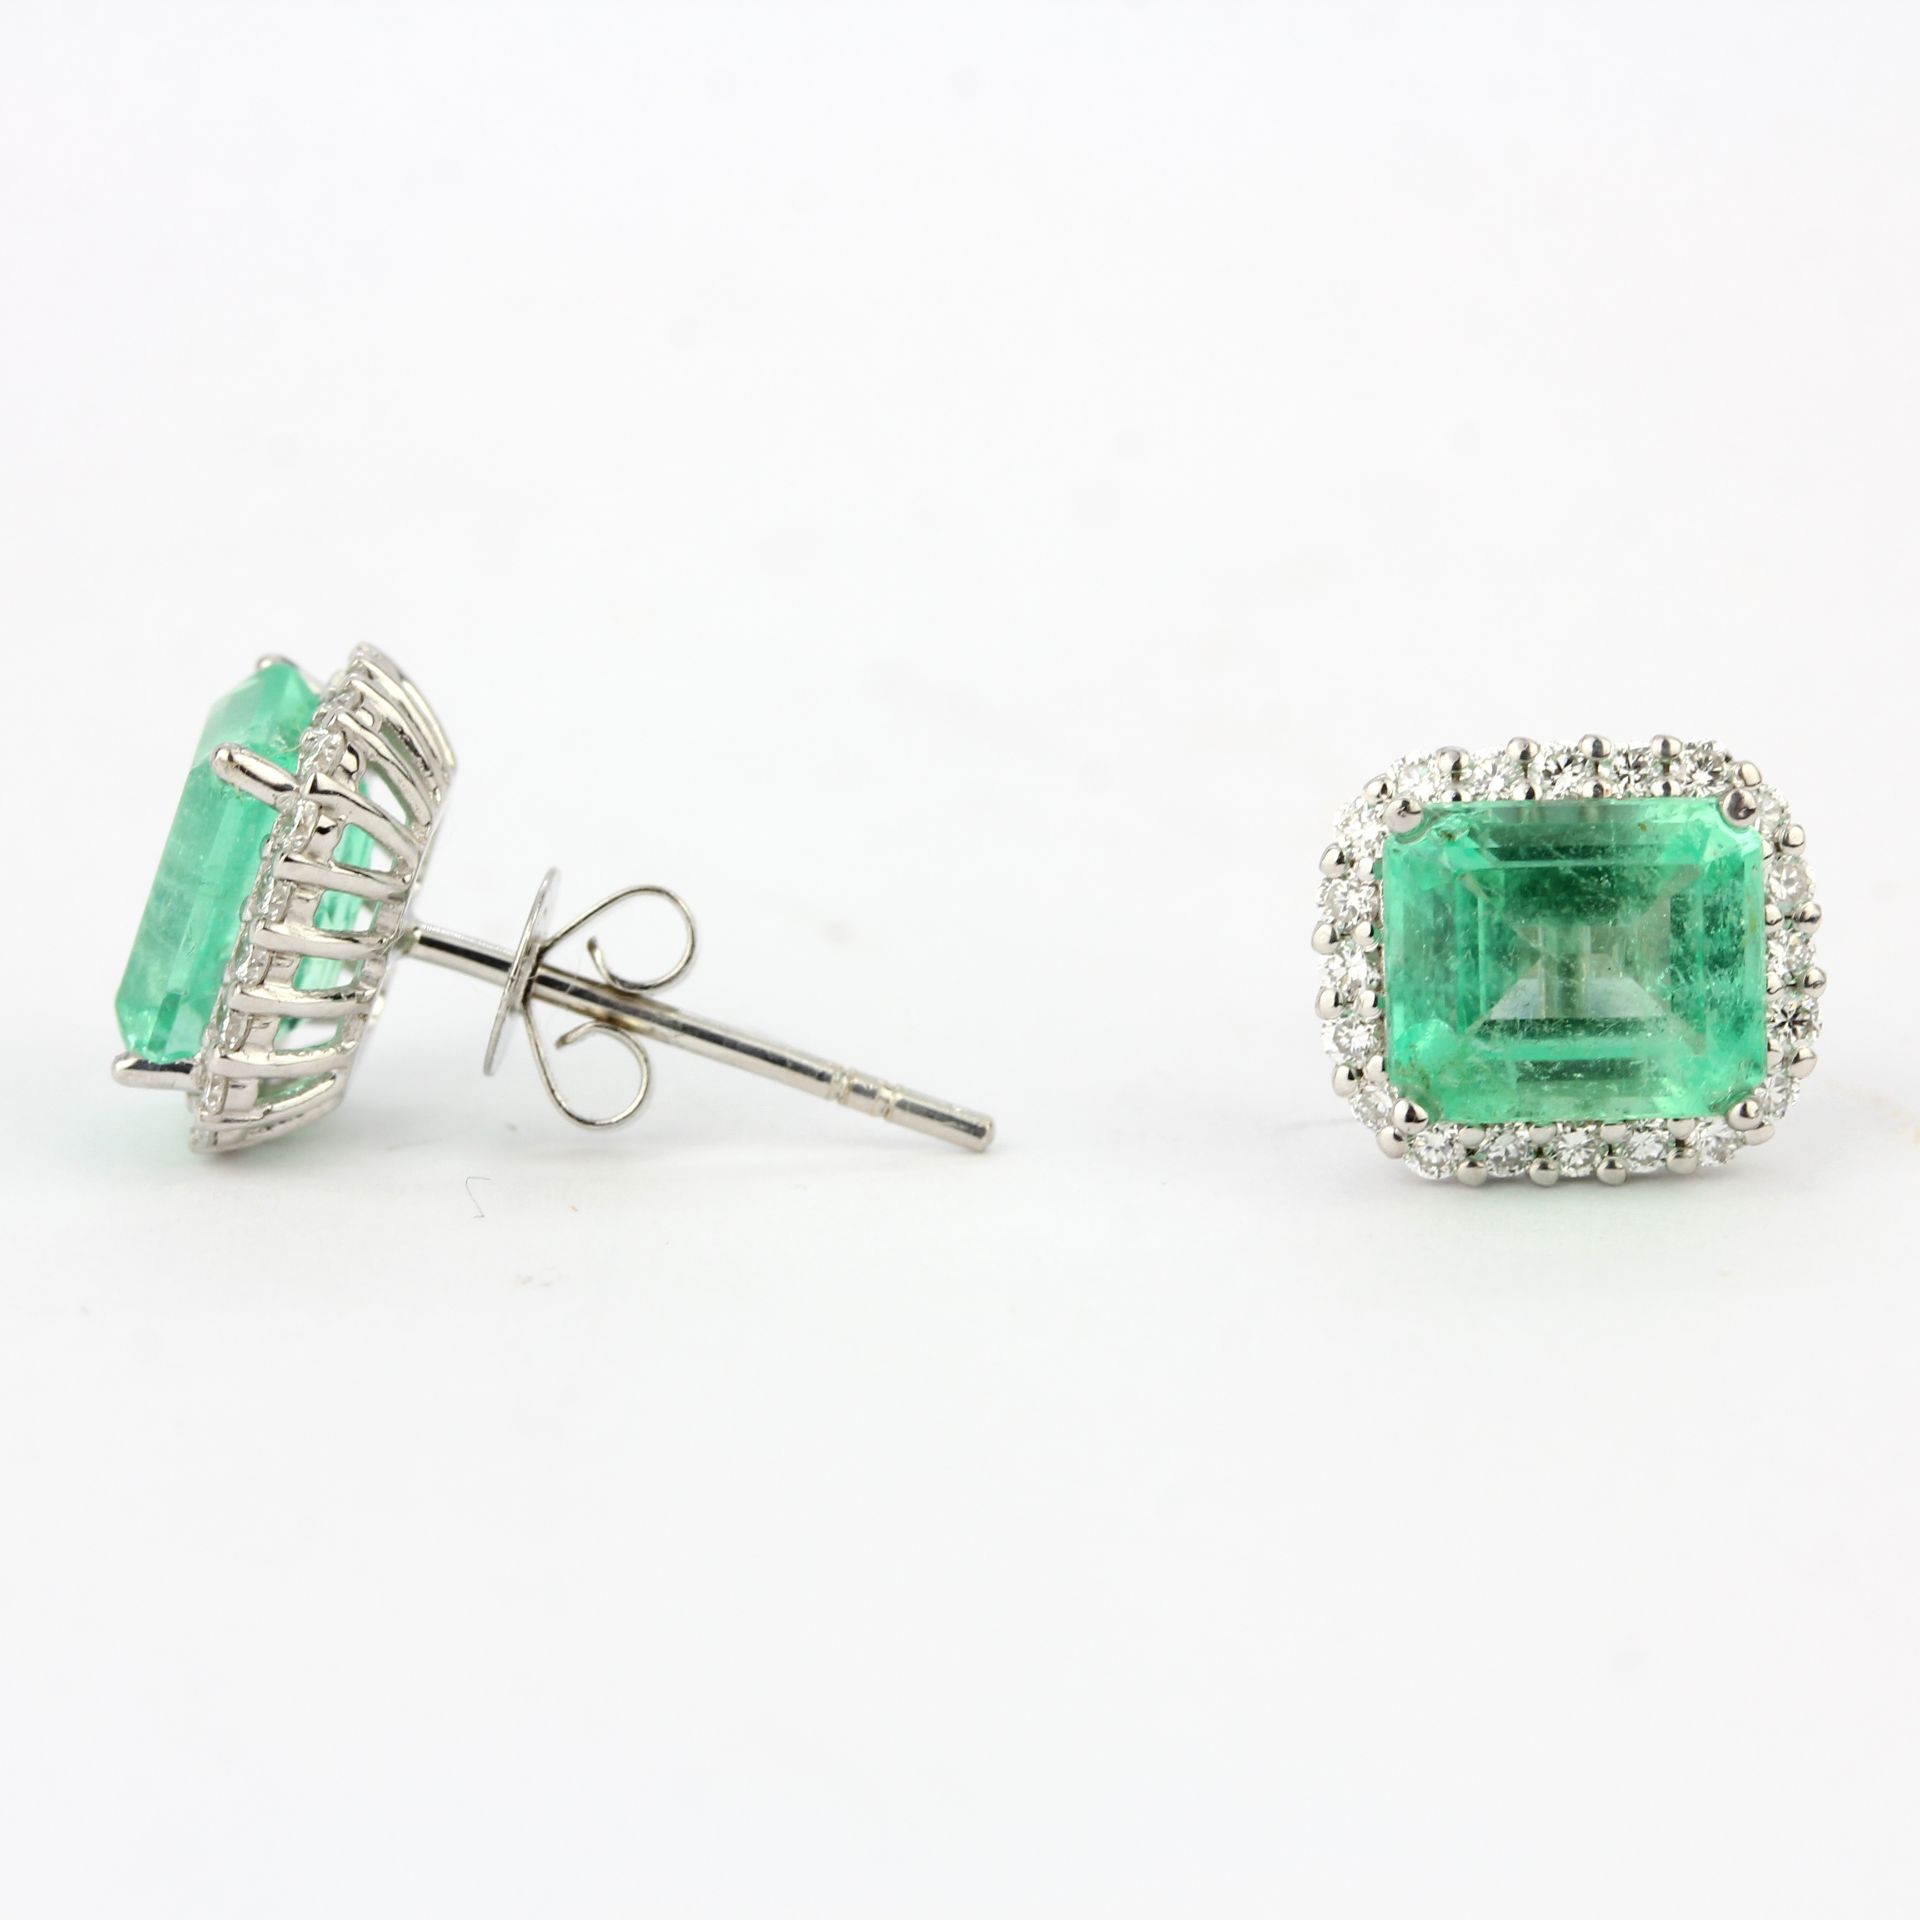 A pair of 18ct white gold earrings set with emerald cut emeralds and diamonds, L. 1.1cm. - Image 3 of 3